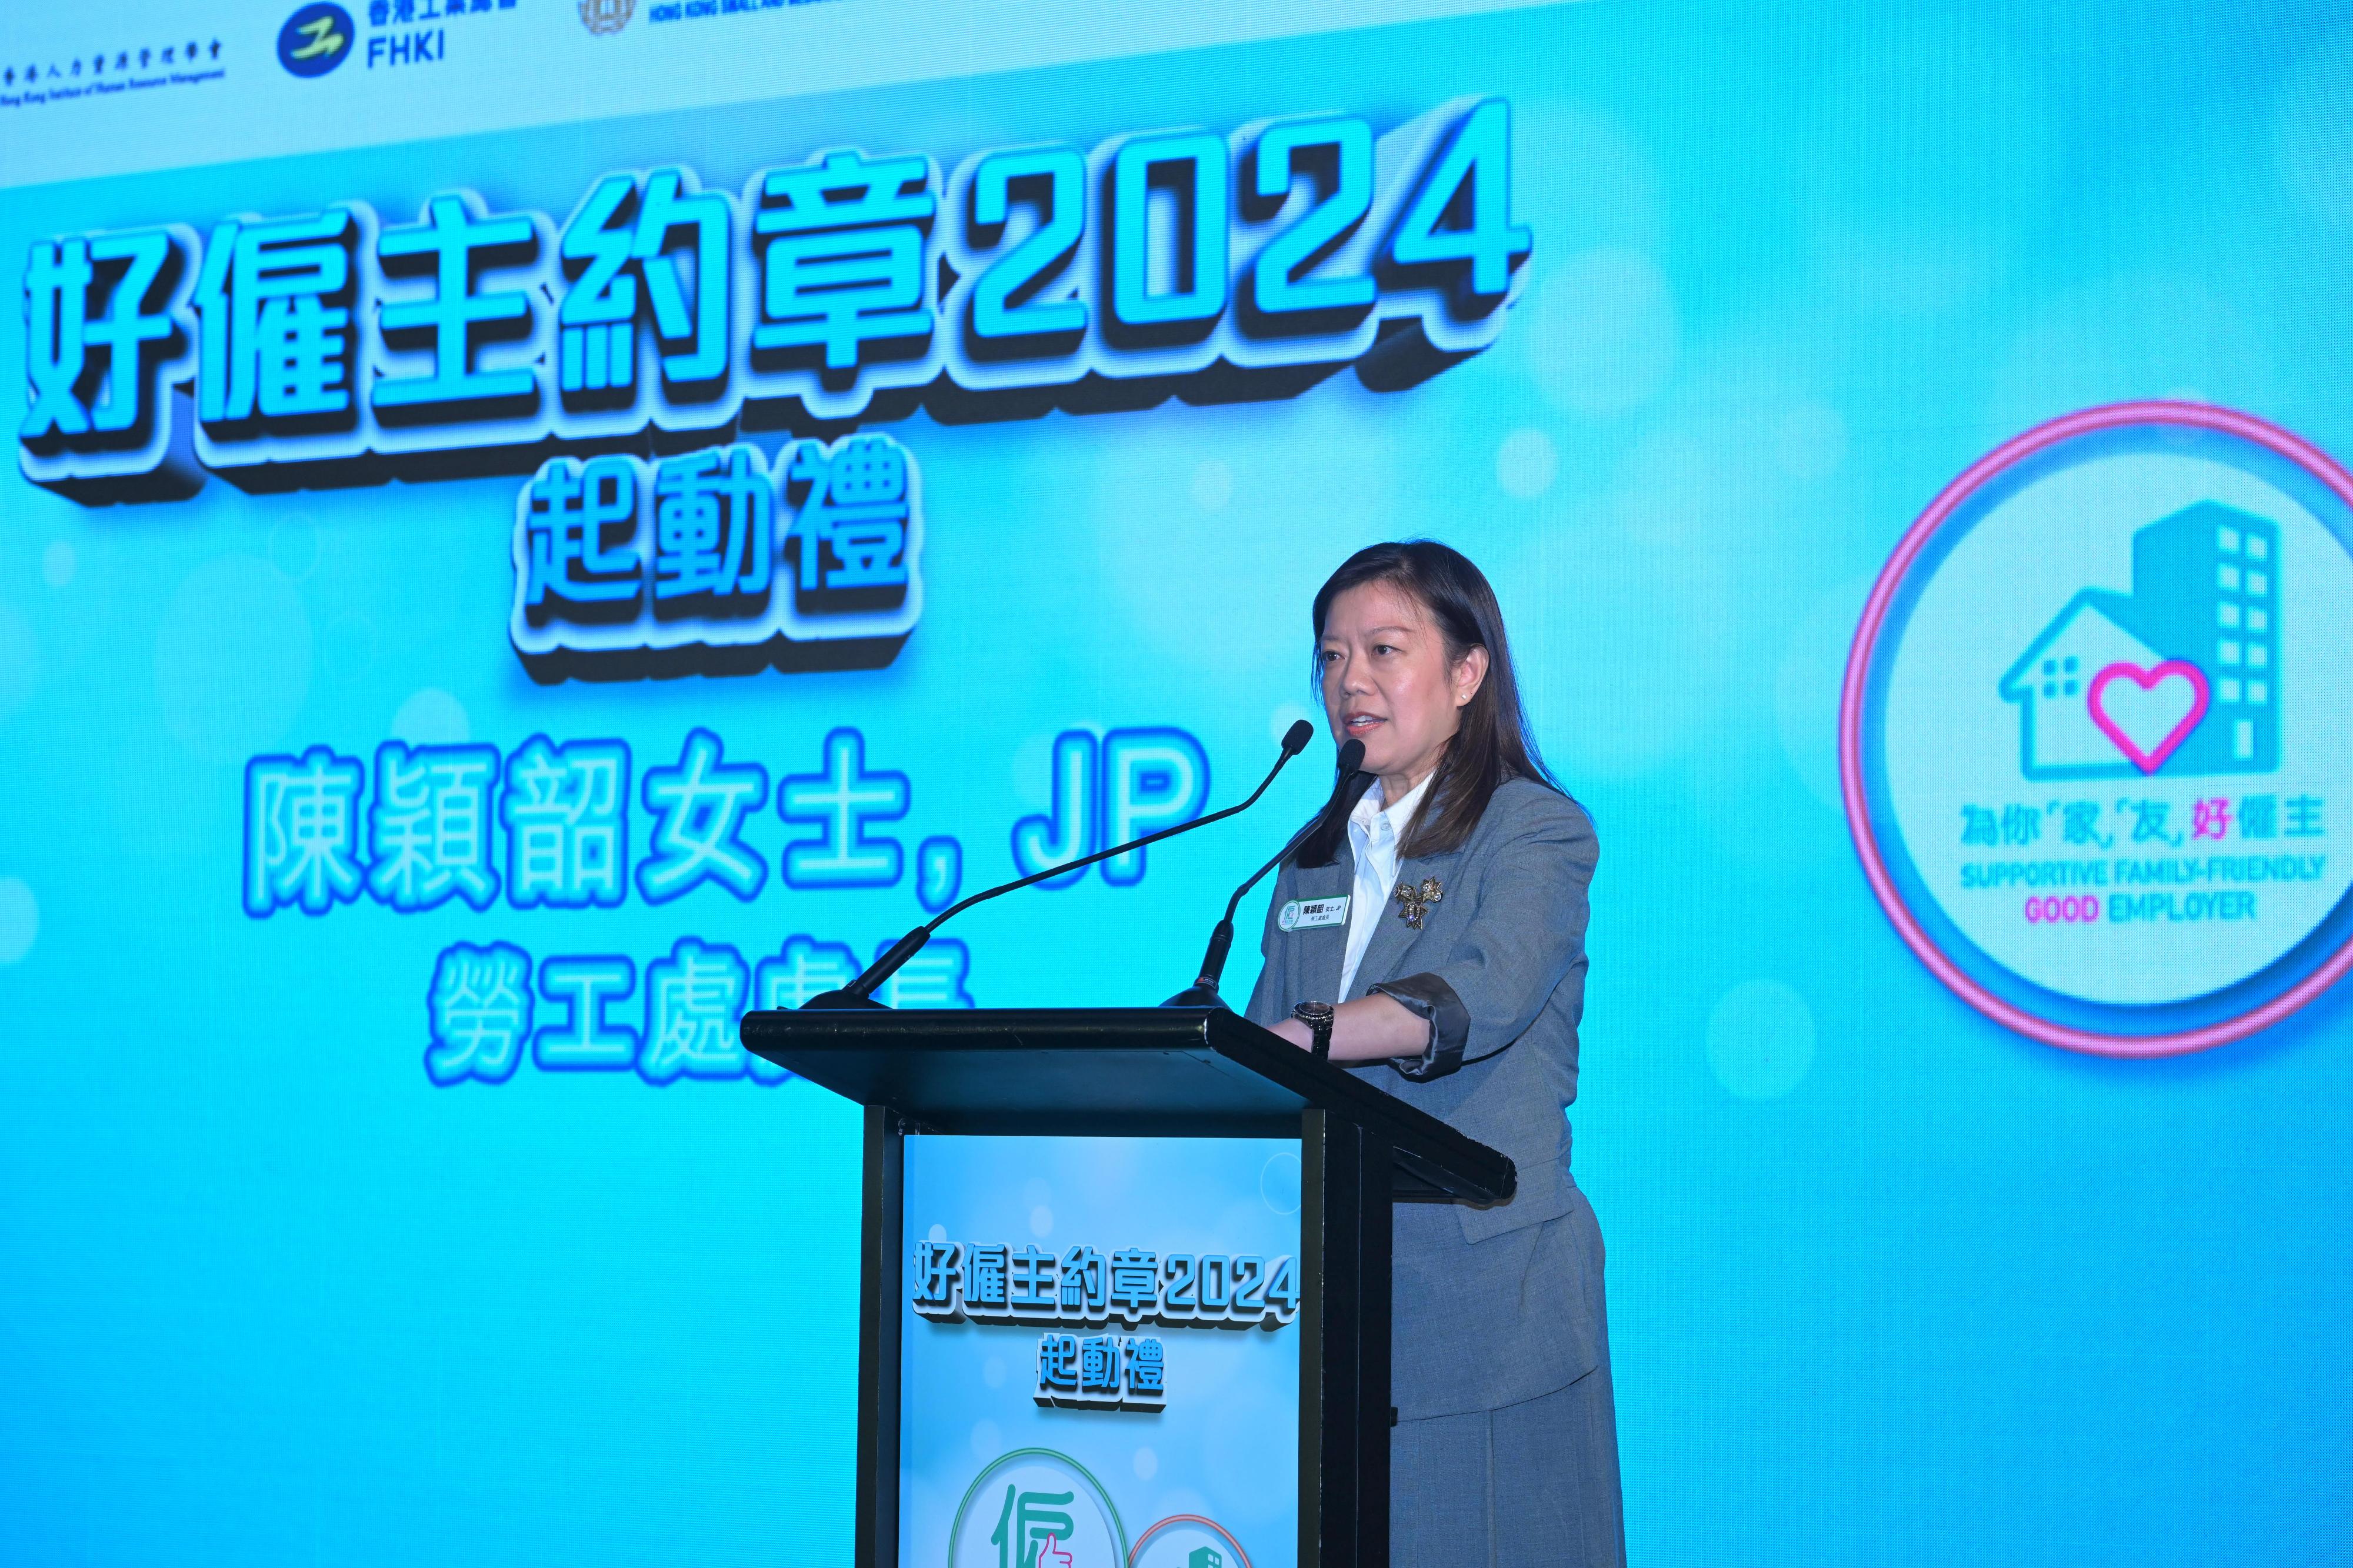 The kick-off ceremony of the Good Employer Charter 2024 was held this afternoon (November 24). Photo shows the Commissioner for Labour, Ms May Chan, addressing the ceremony.